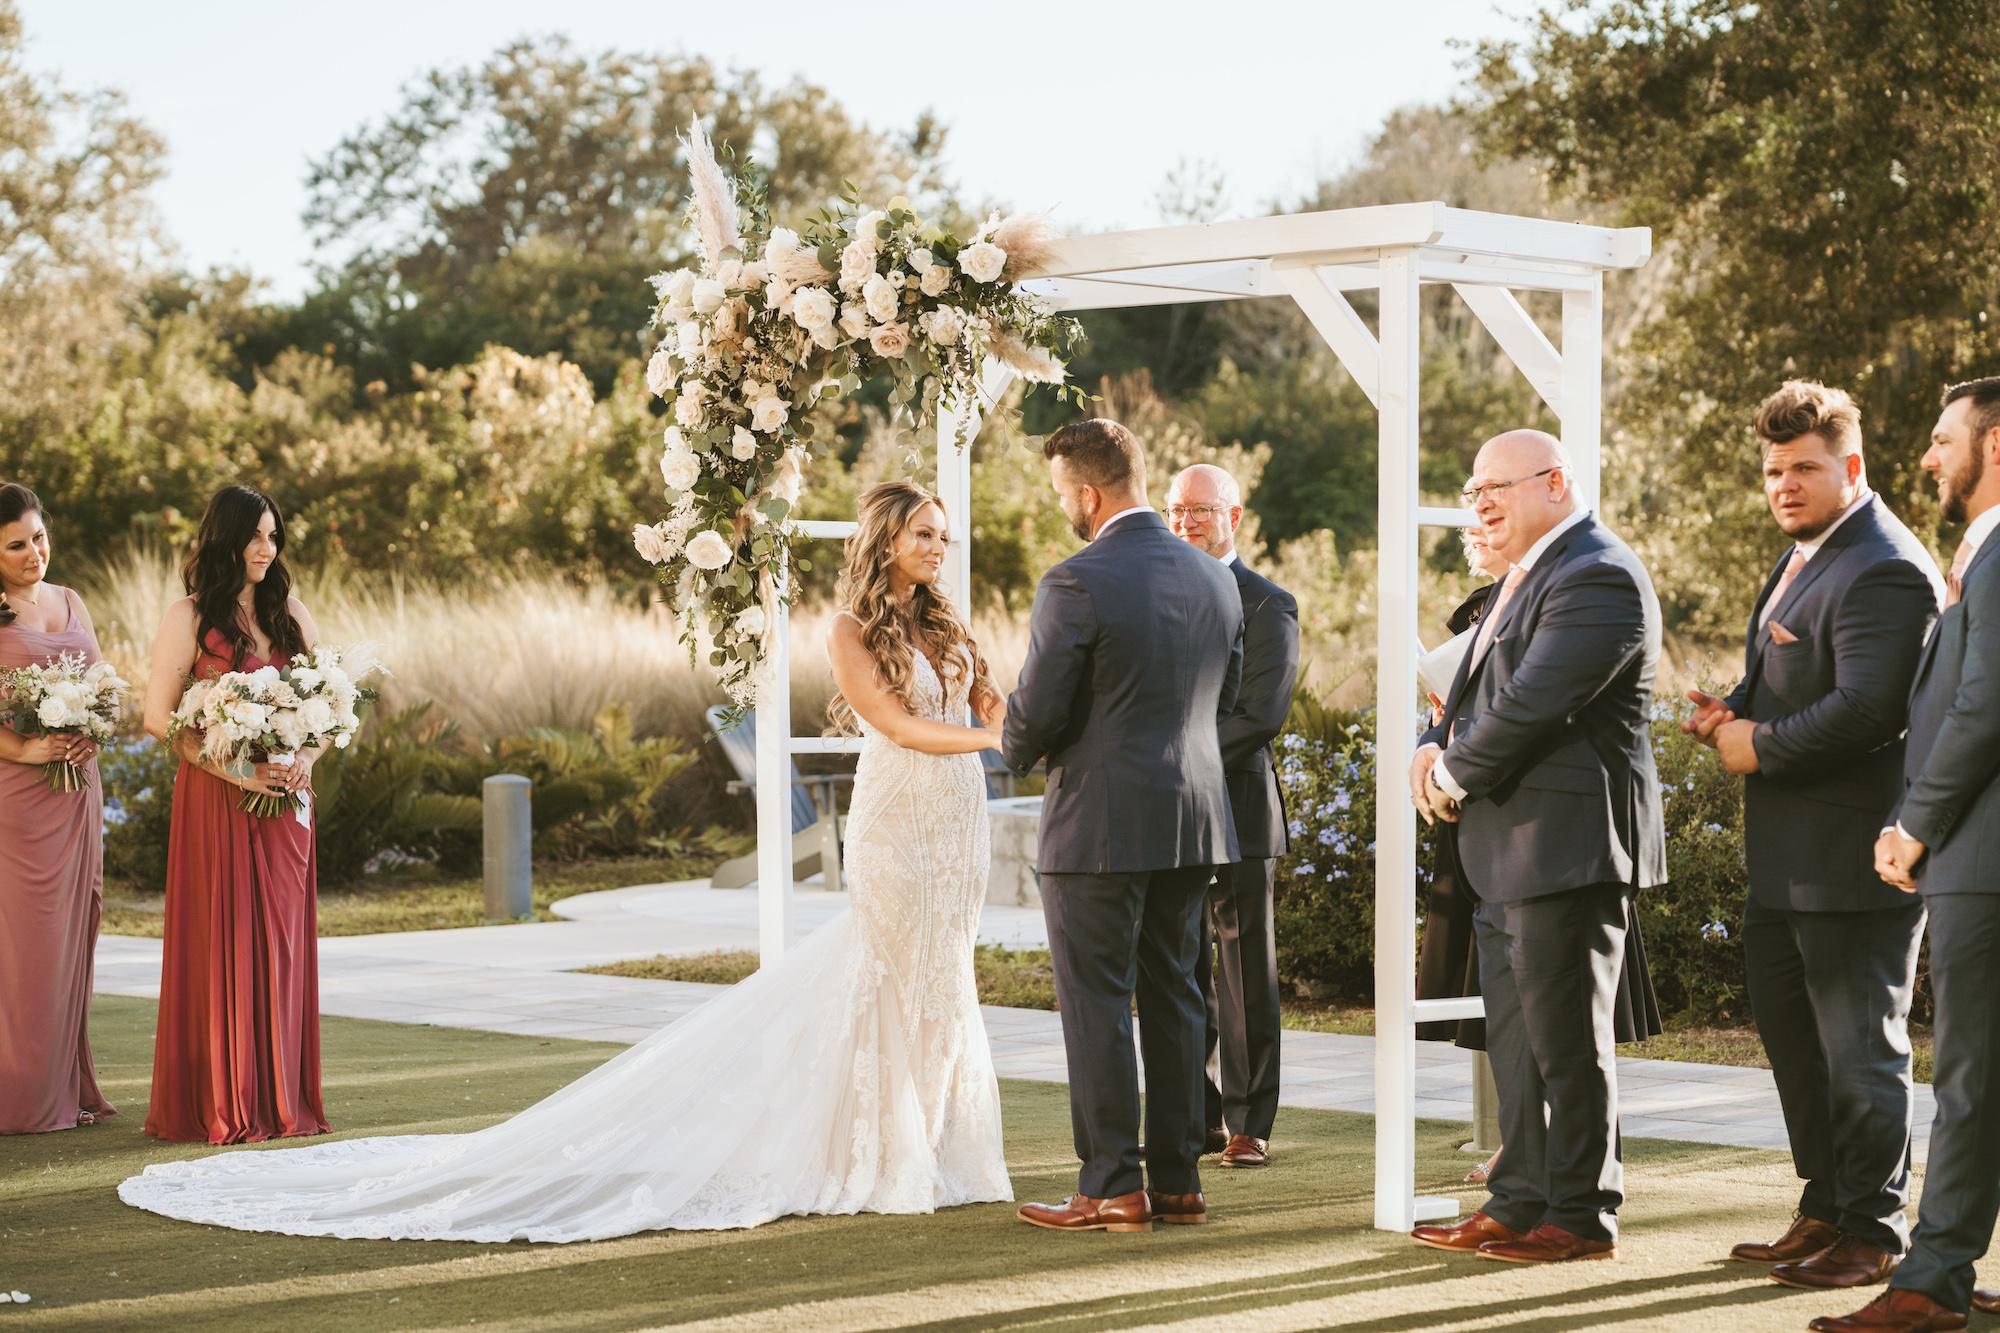 Bride and Groom Exchanging Vows in Outdoor Wedding Ceremony on Golf Course with Classic Details and Elegant Florals | Tampa Wedding Photographer Mars and The Moon Films